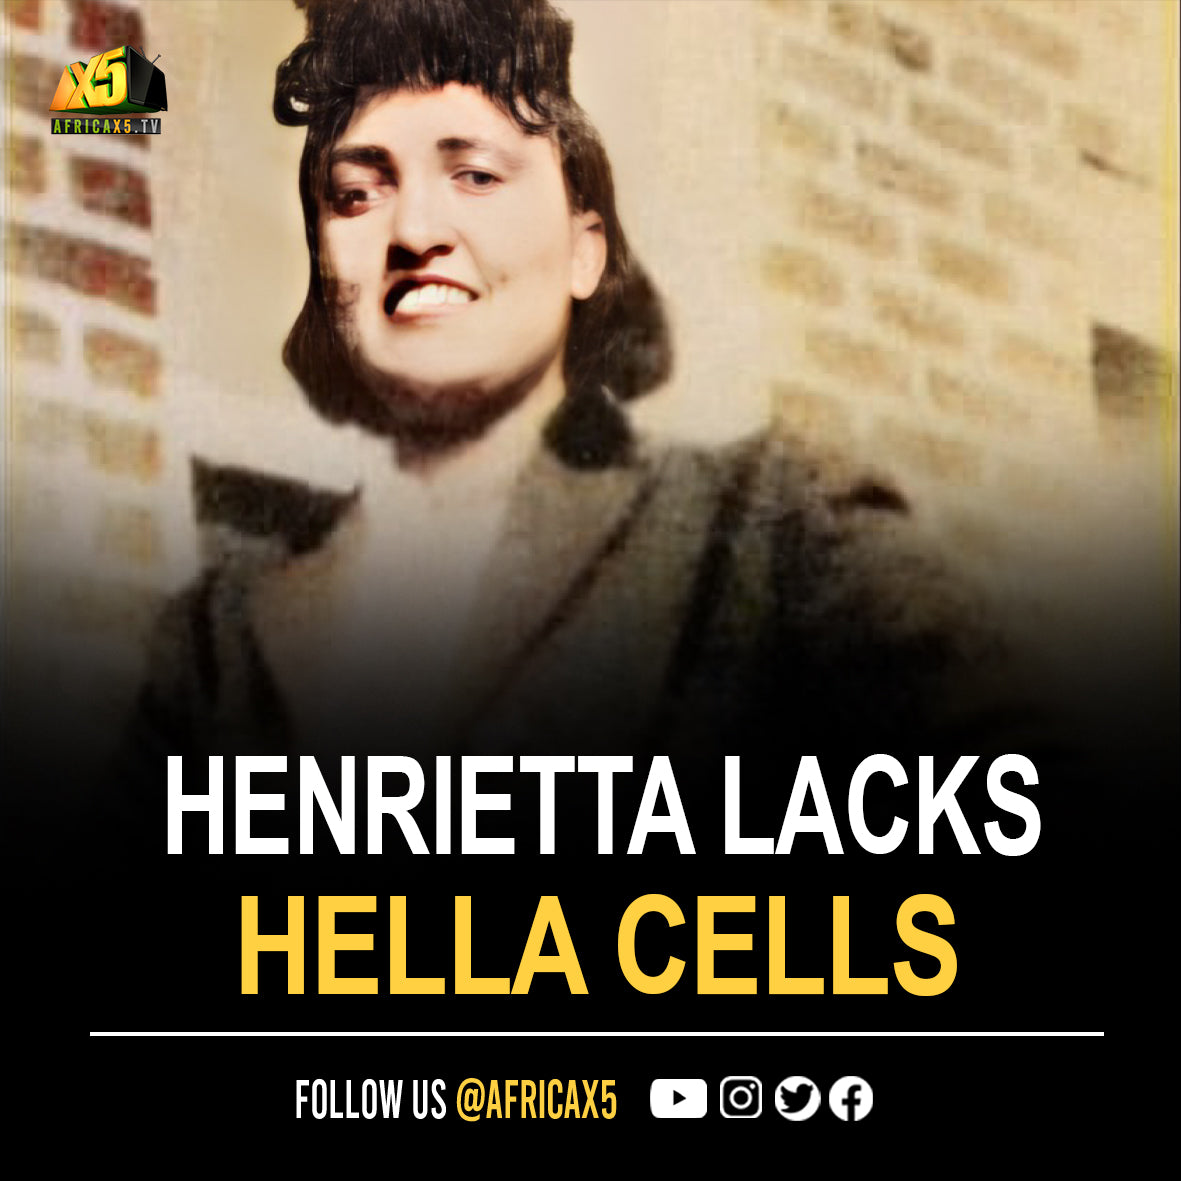 On October 4 th 1951, Henrietta Lacks died. Her cells were taken without her knowledge in 1951 (HeLa cells) and became one of the most important tools in medicine.